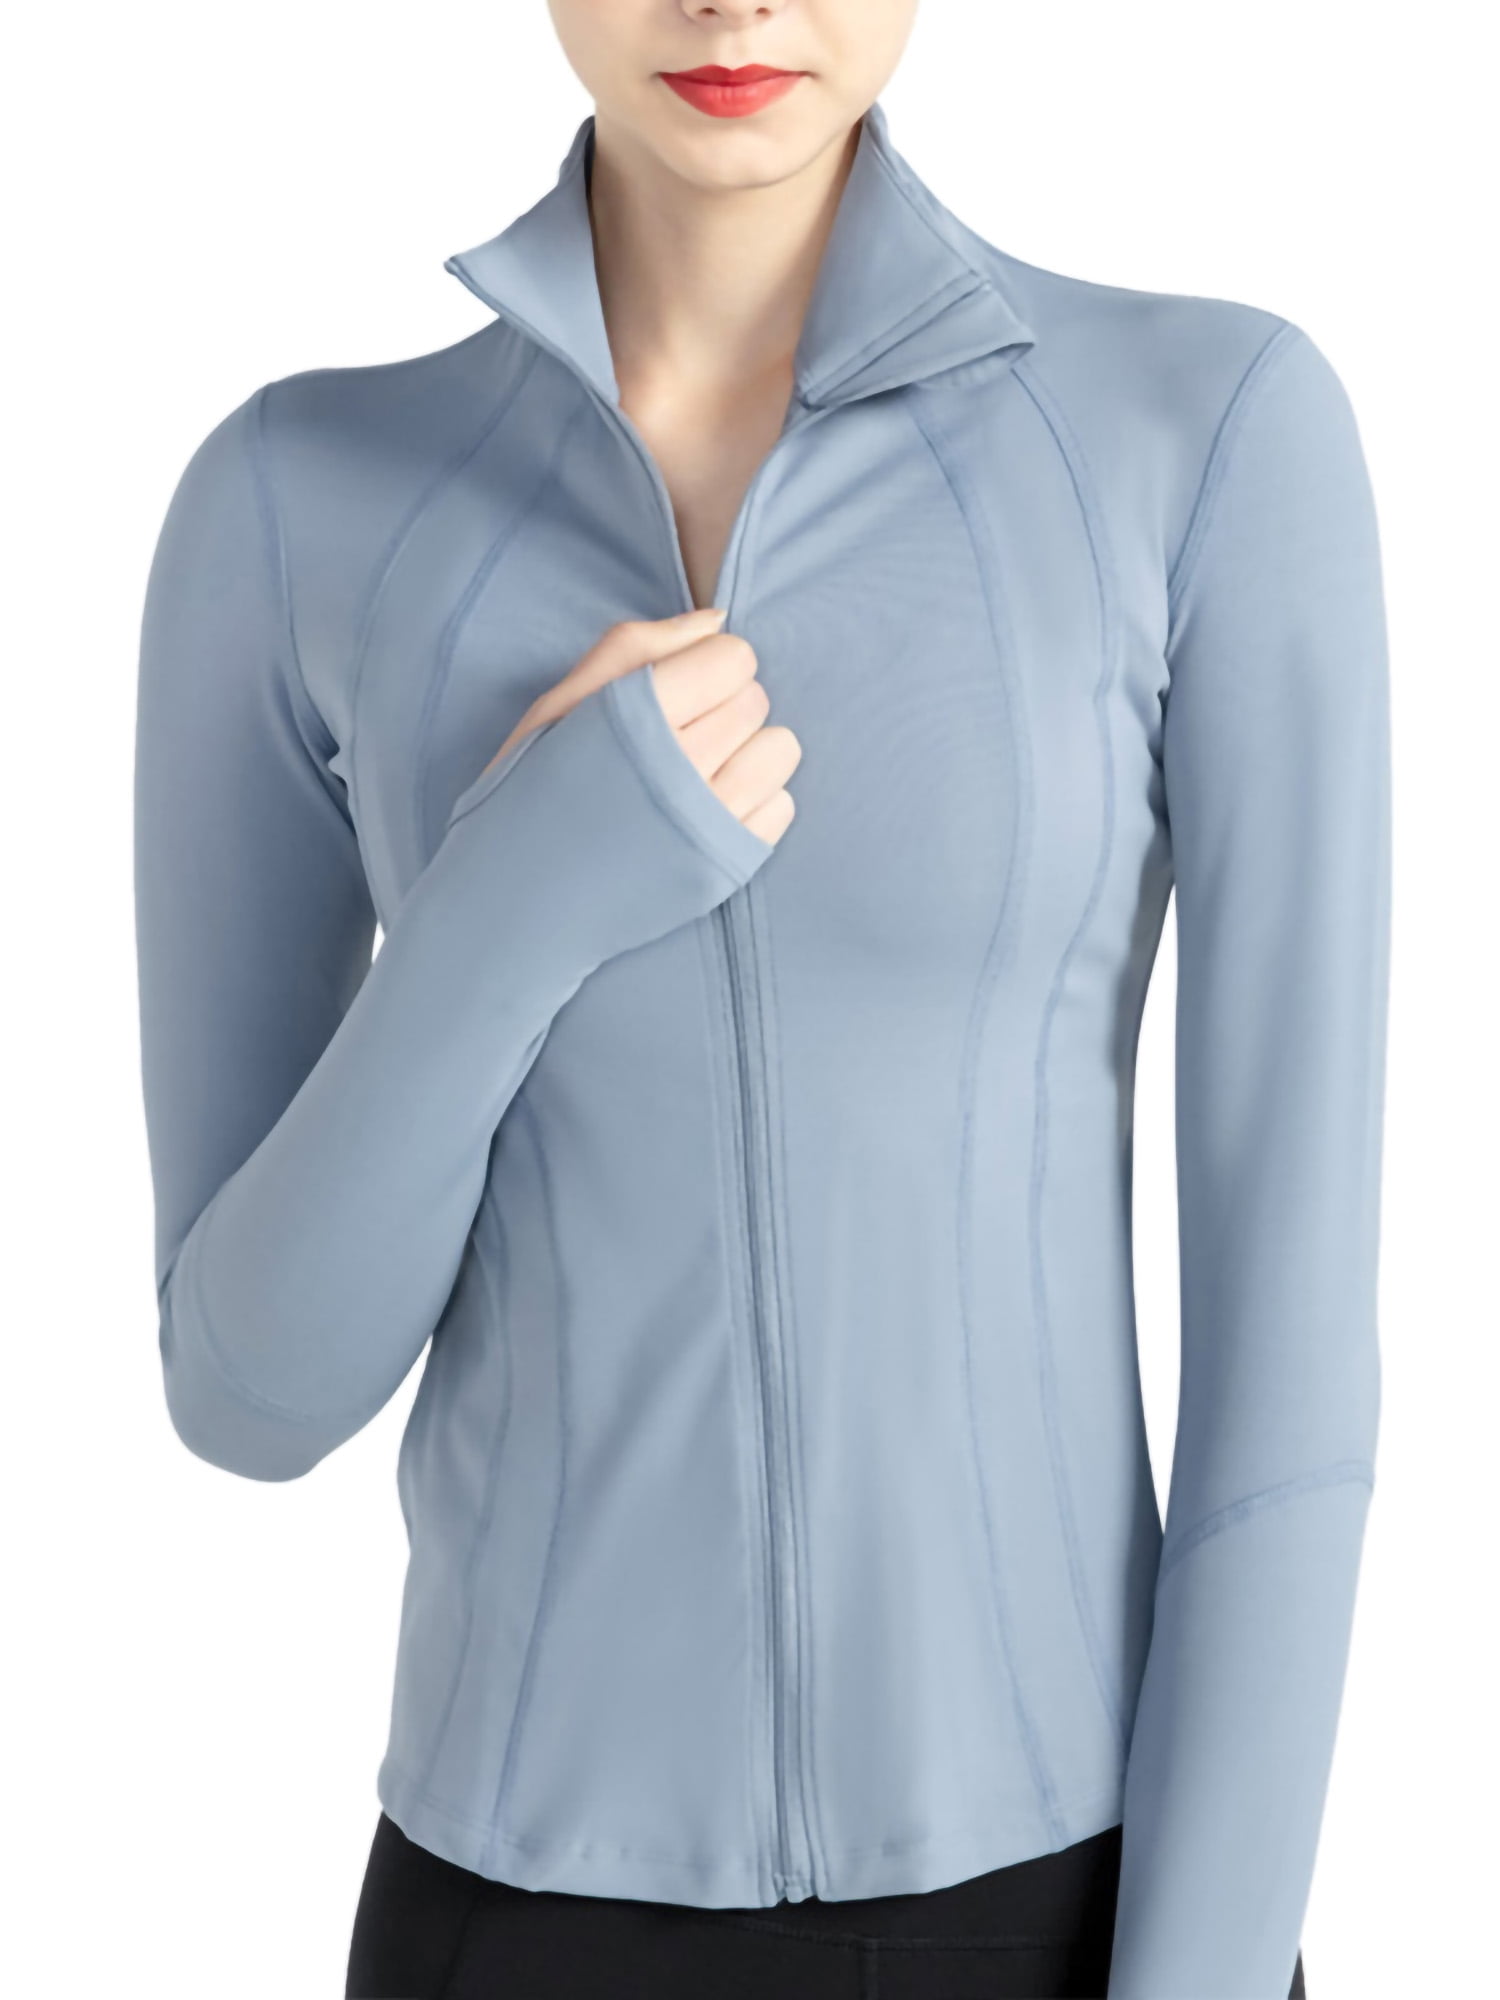 JBEELATE Women's Sports Jacket Athletic Full Zip Lightweight WorkoutSlim  Fit Long Sleeve Running Pullover with Thumb Holes 